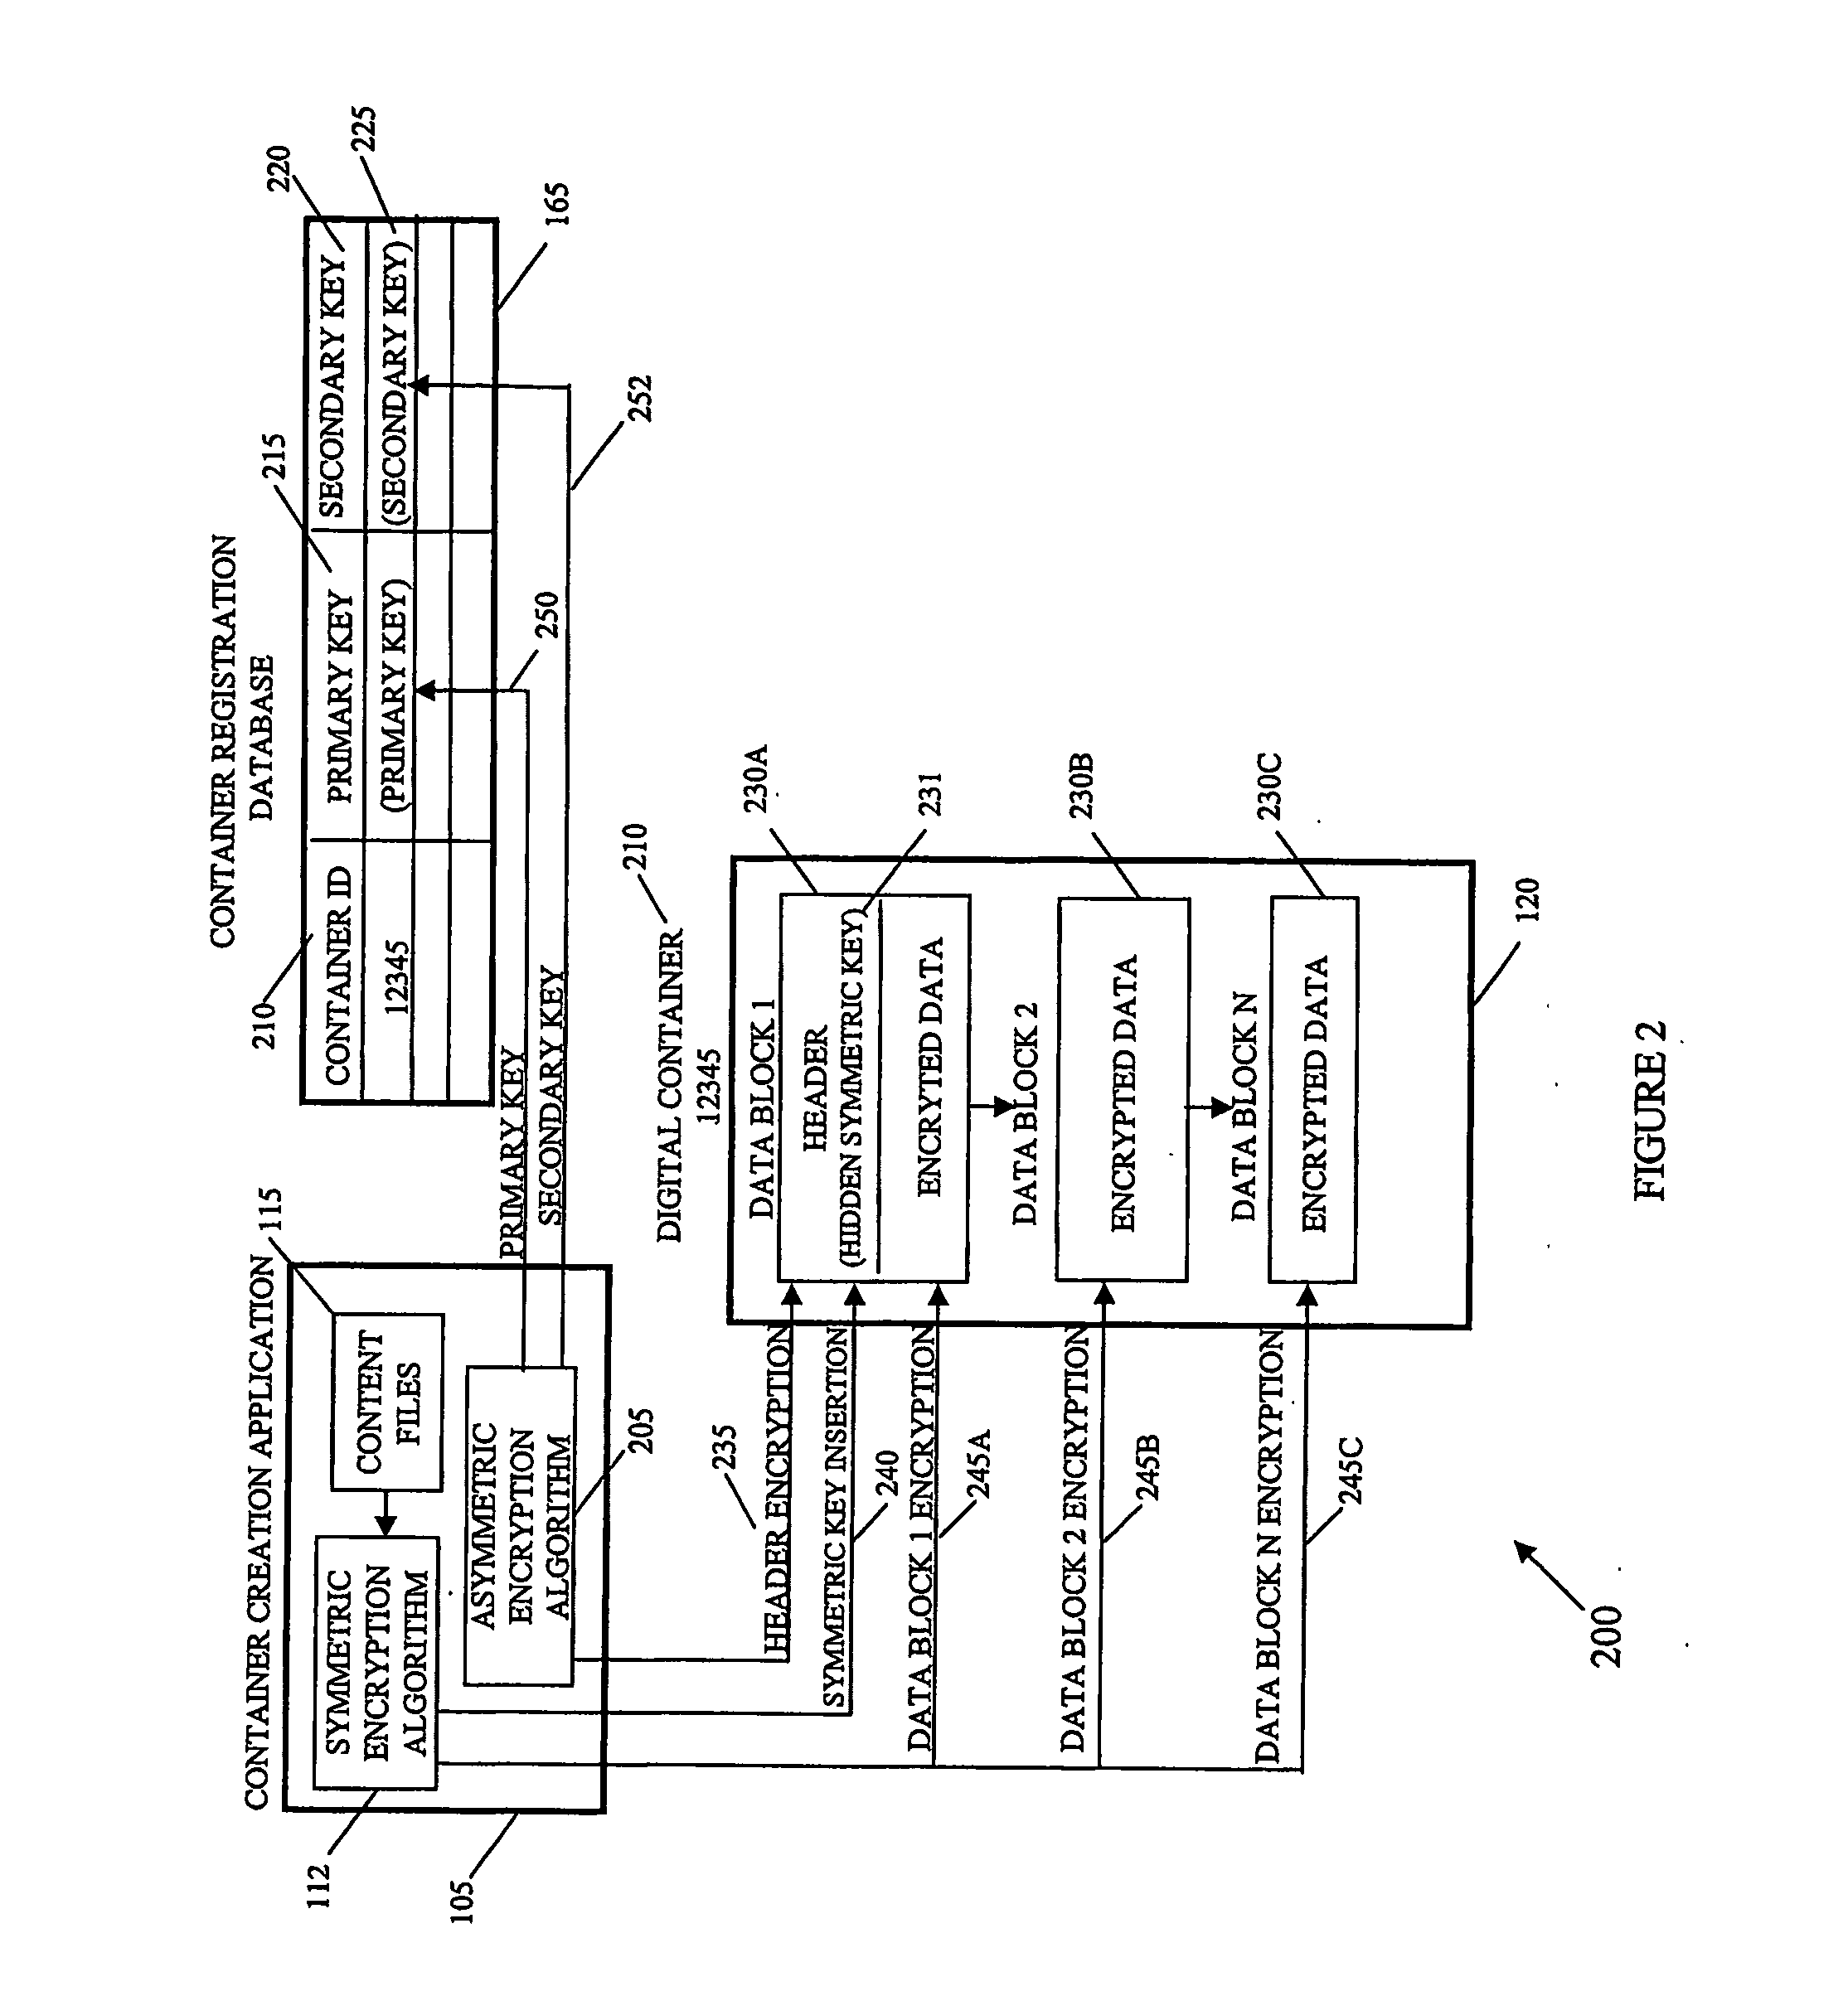 Securing digital content system and method